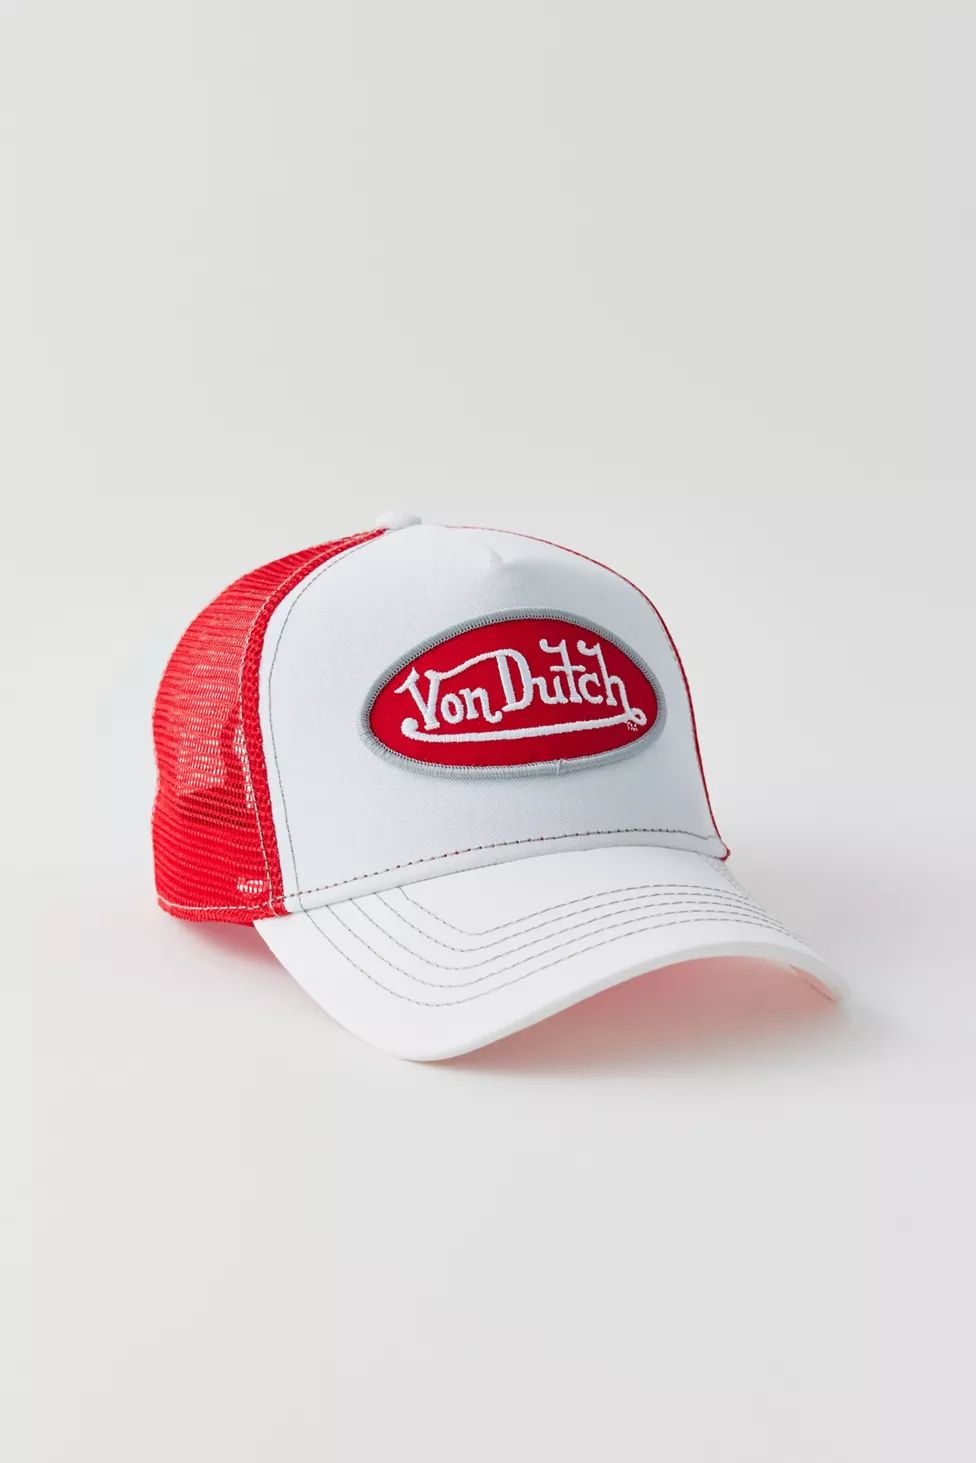 Von Dutch White & Red Trucker Hat | Urban Outfitters (US and RoW)